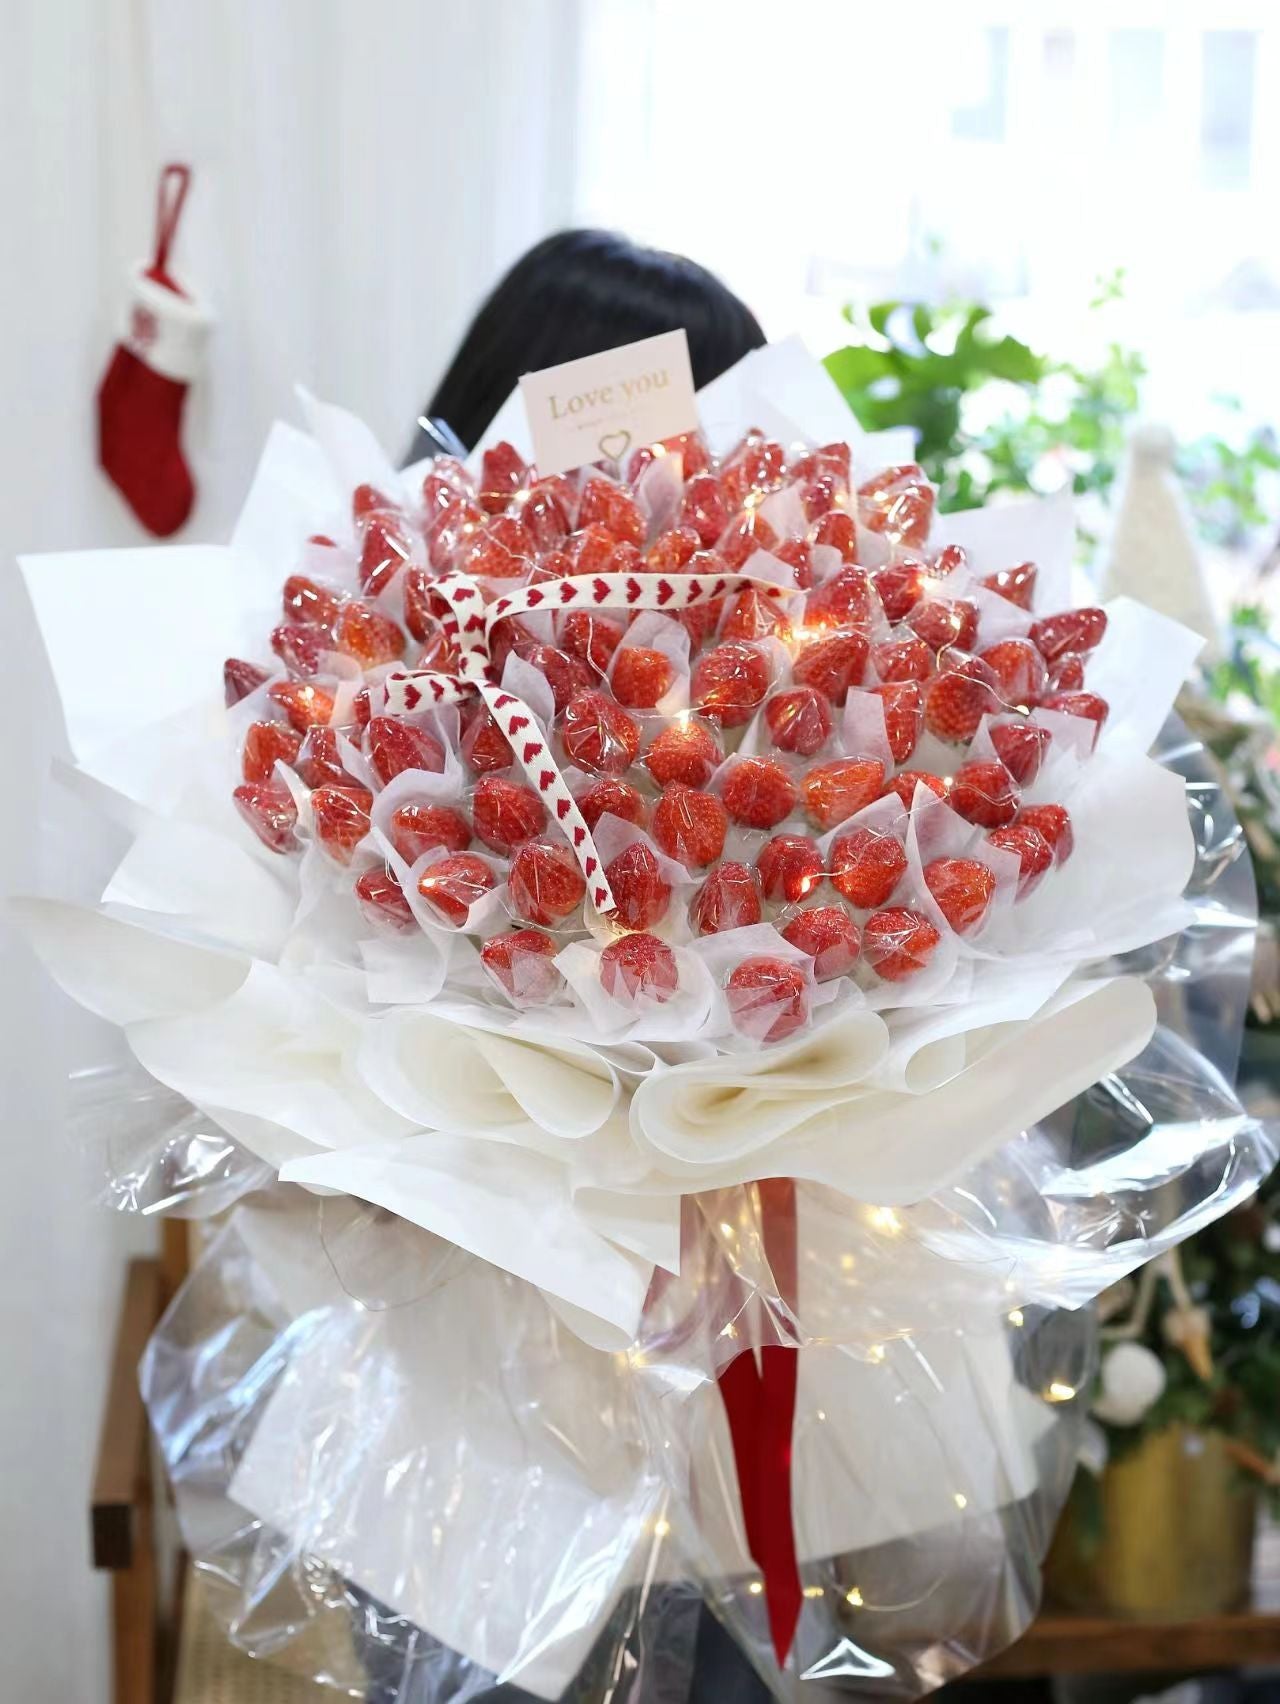 Chocolate Strawberry Bouquet DIY Material Kit 100pcs Bamboo Sticks with PVC  Holders